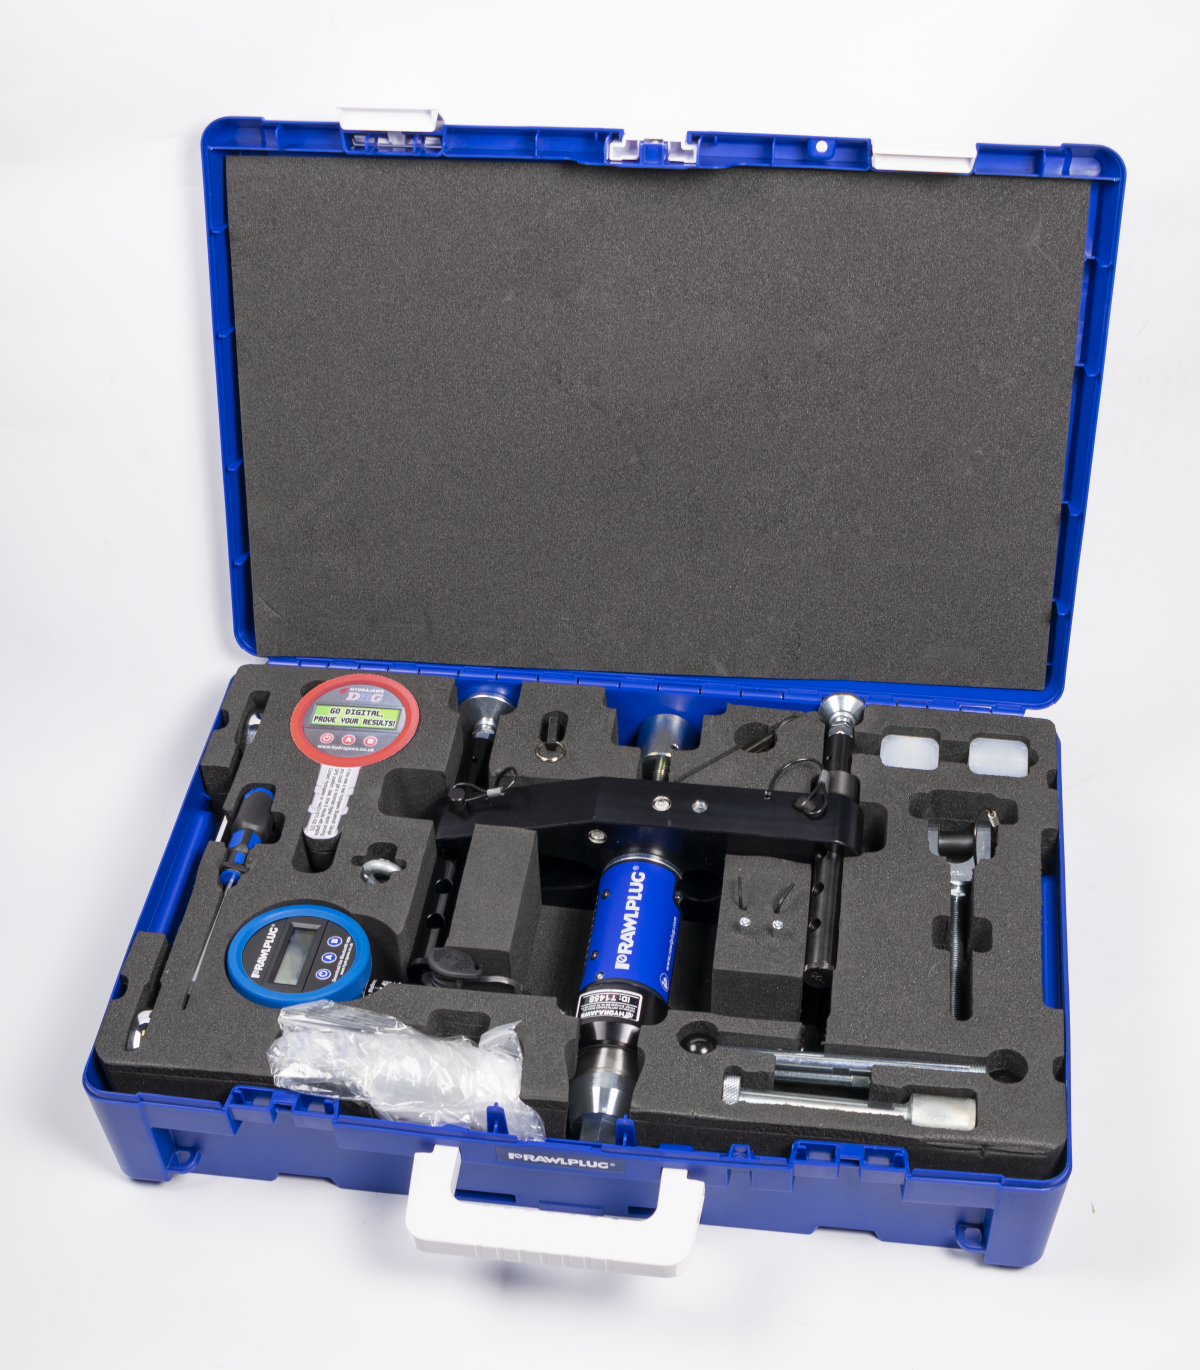 R-TK-D2050-050 Pull-out testers for anchors 50kN, accessories, RAWLCASE